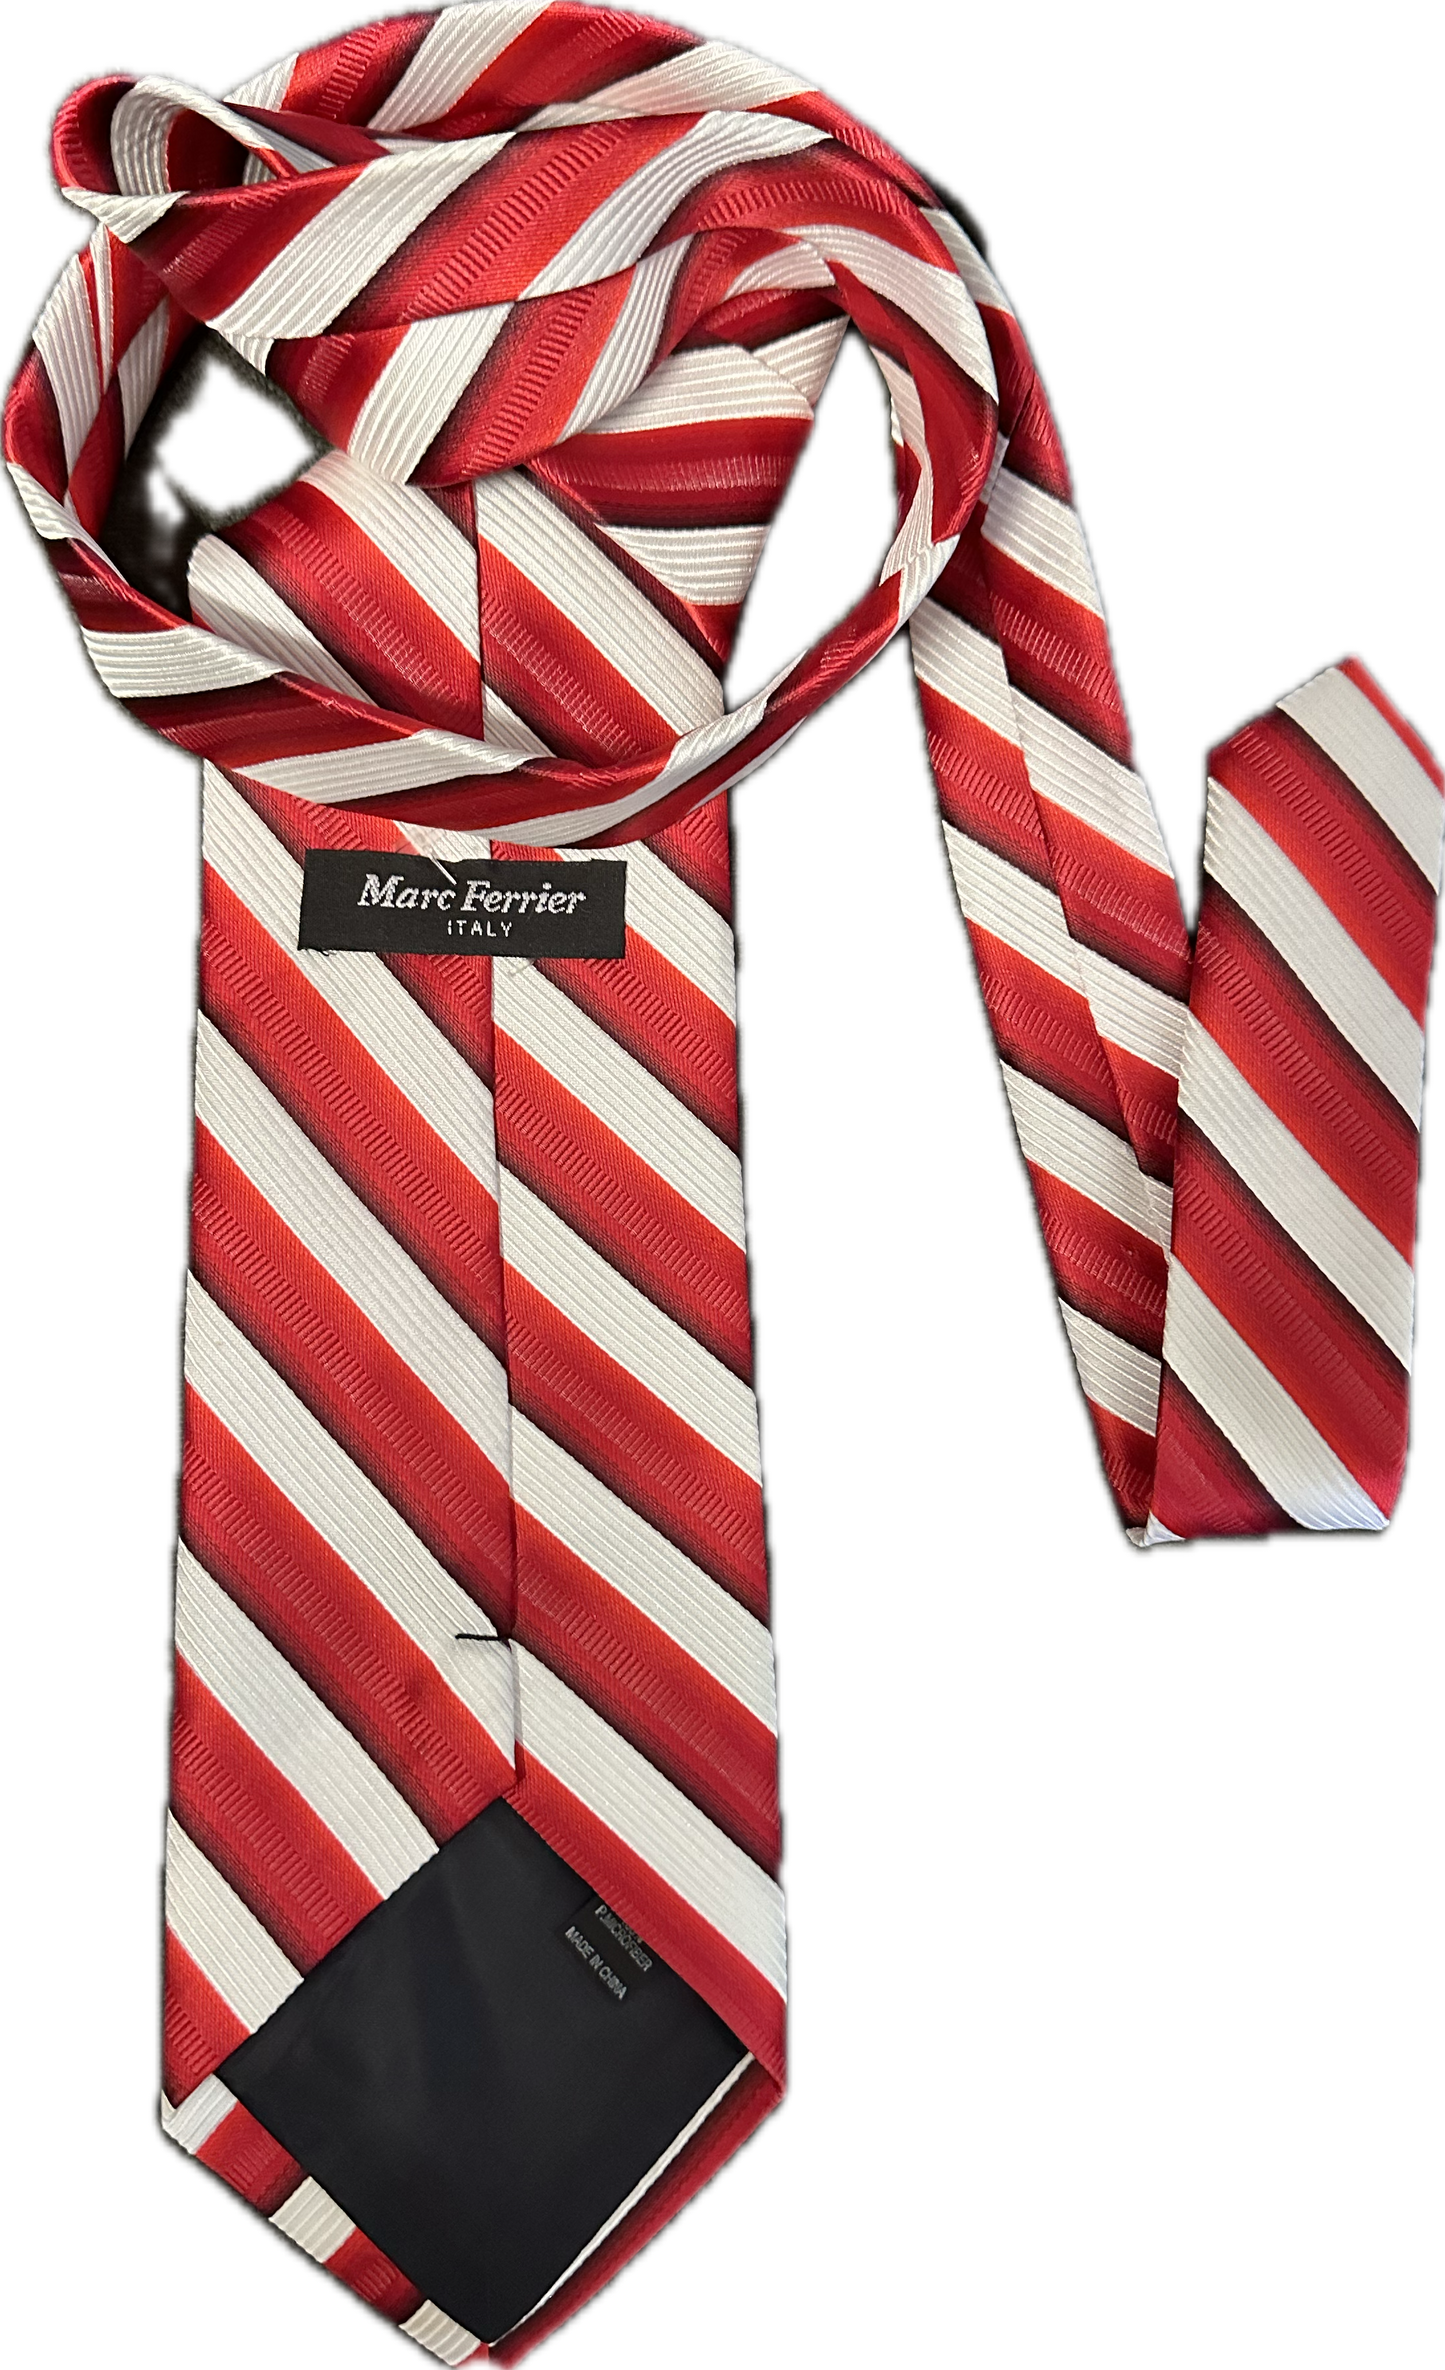 THE OFFICE: Andy’s Striped Necktie Collection